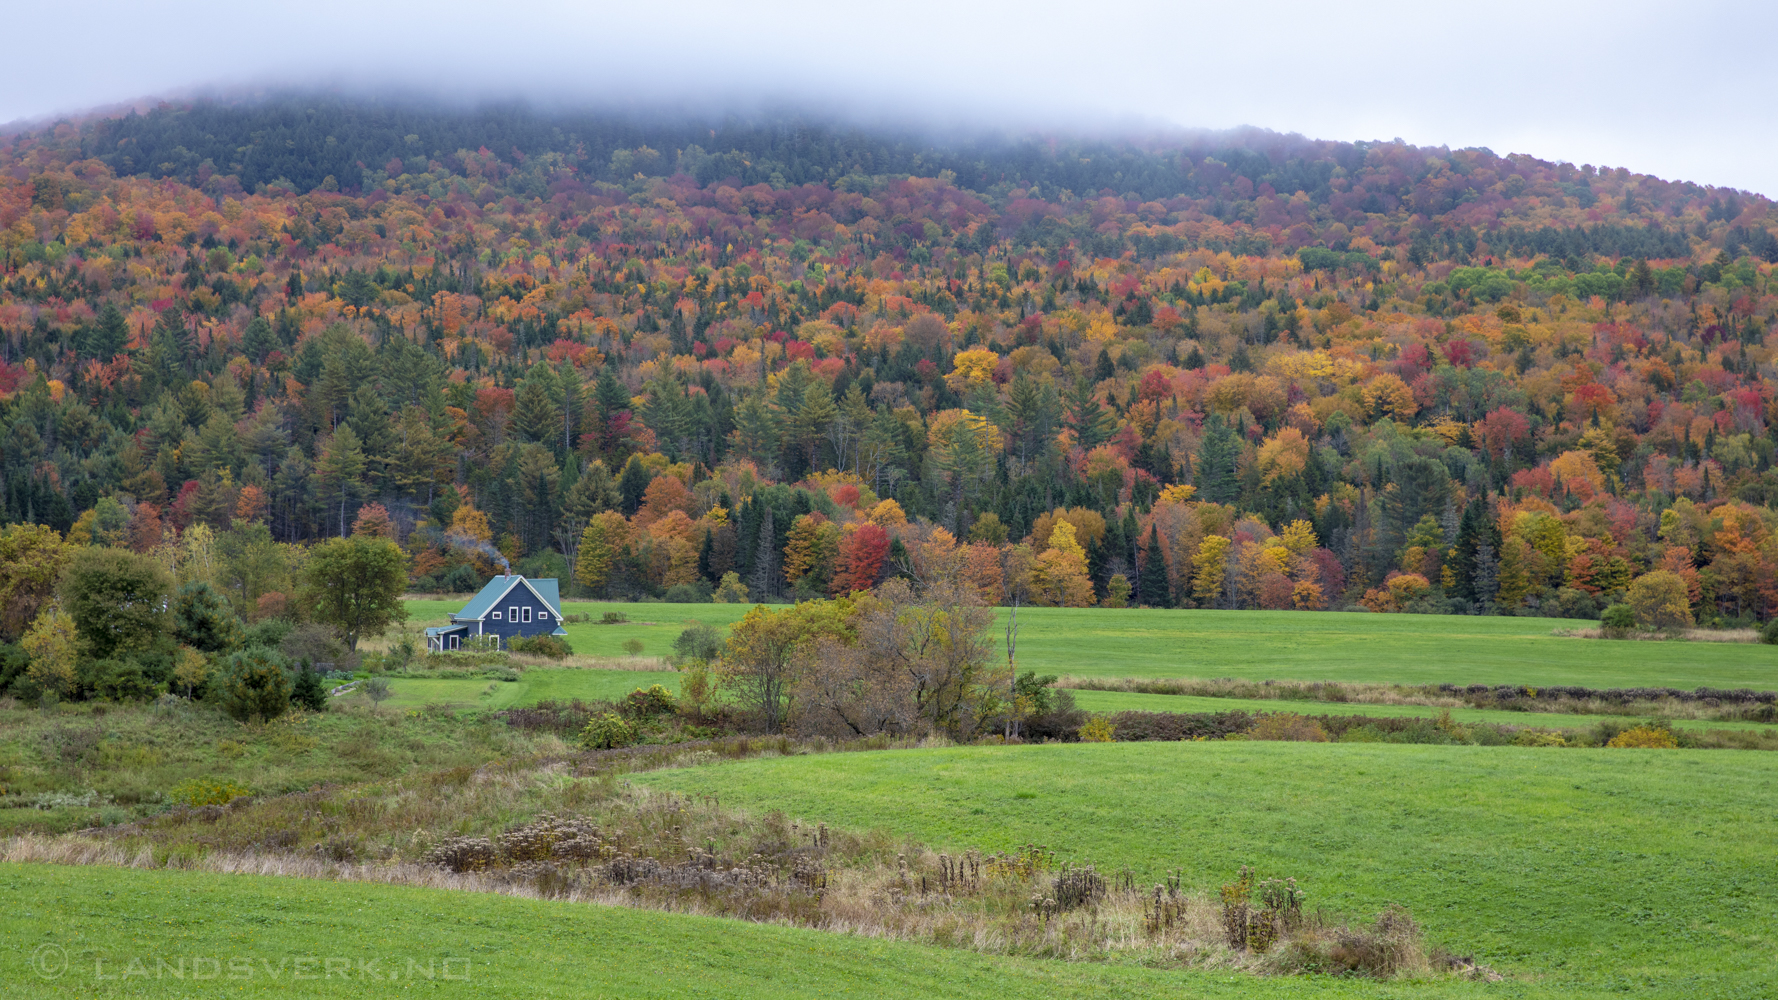 Not far from Waterbury, Vermont. 

(Canon EOS 5D Mark IV / Canon EF 24-70mm f/2.8 L II USM)